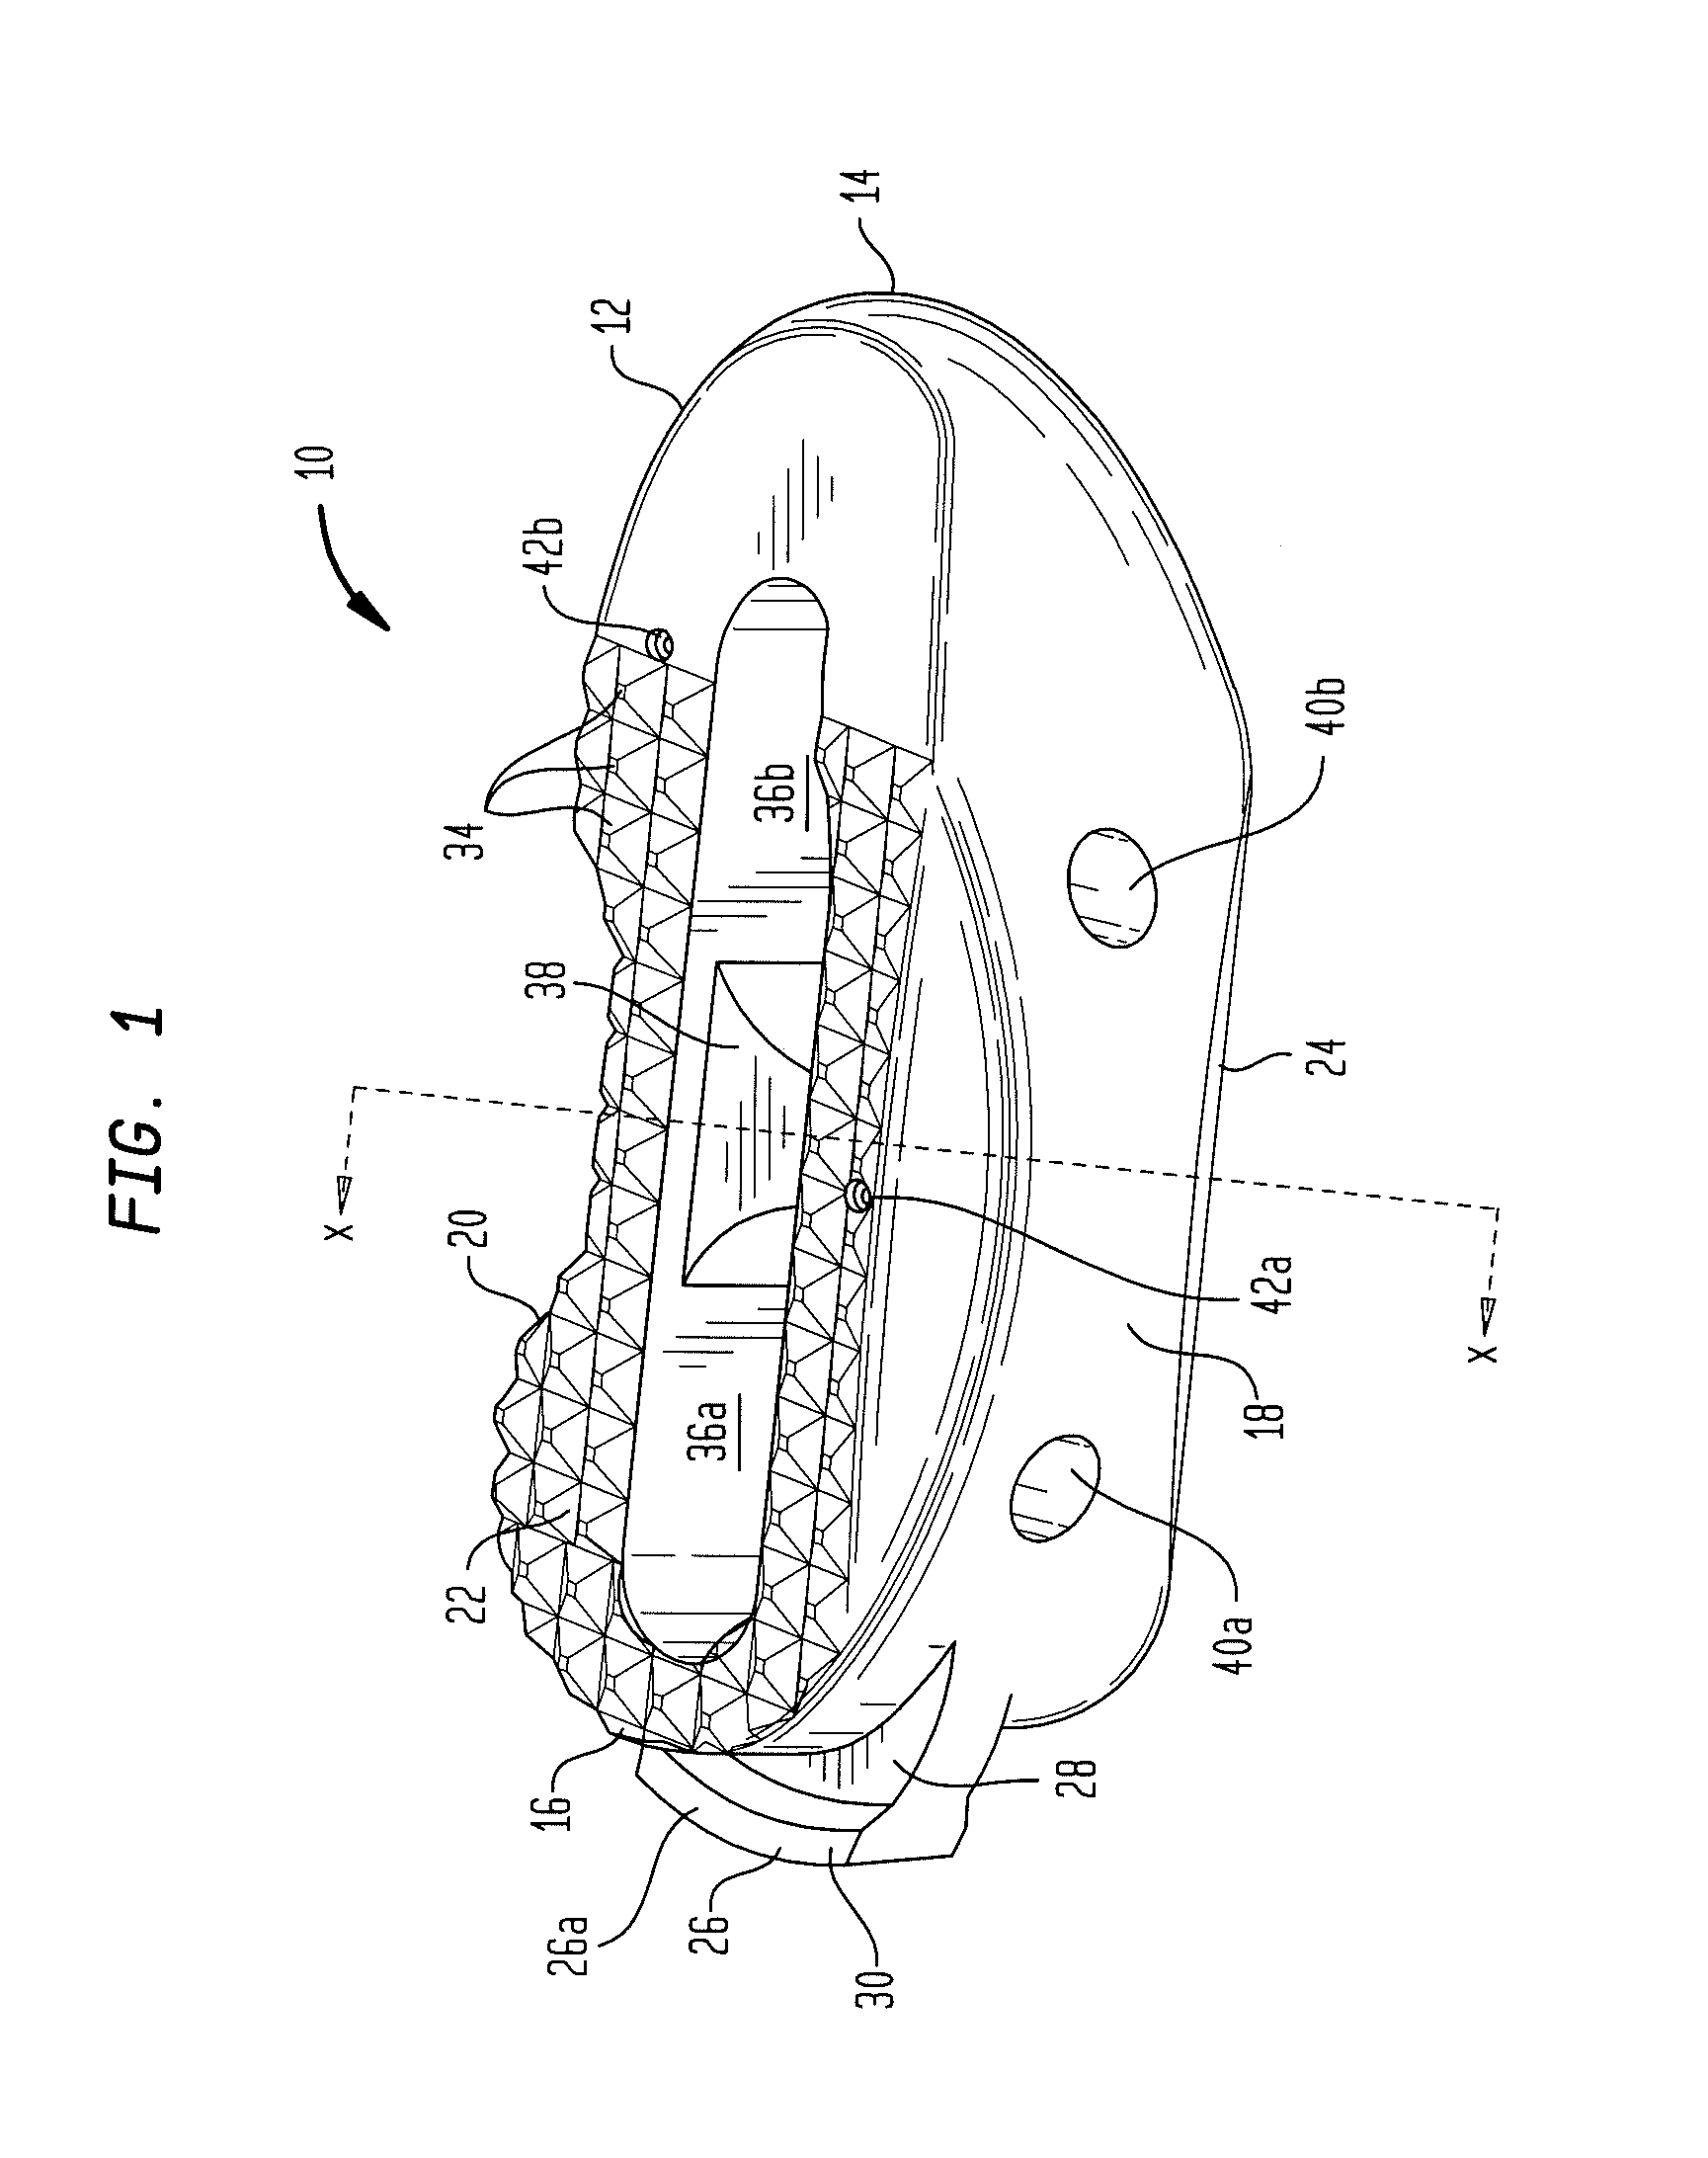 Surgical implant with guiding rail